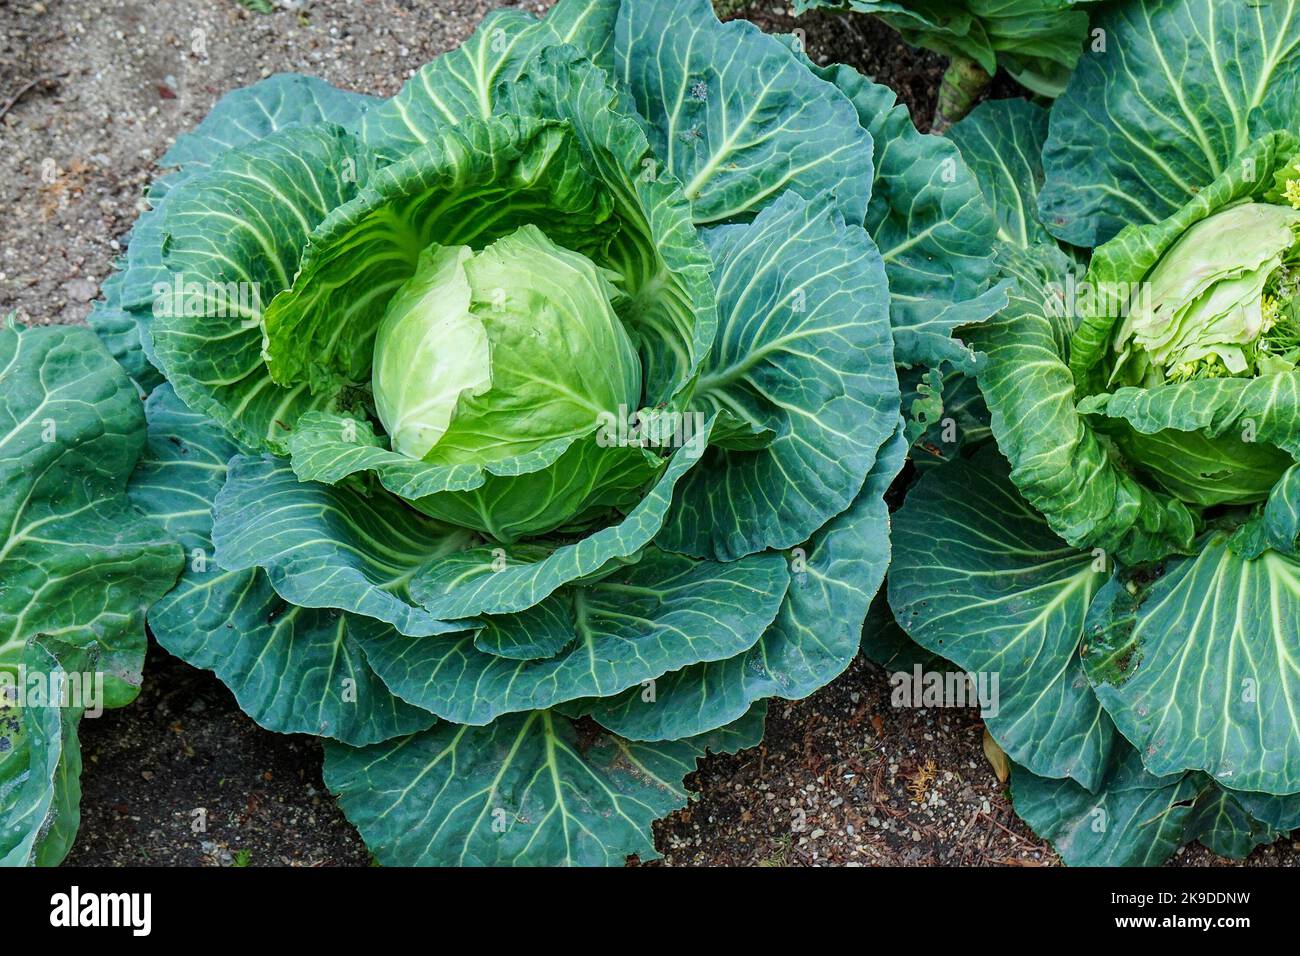 Fresh cabbages growing in the ground in vegetable garden Stock Photo